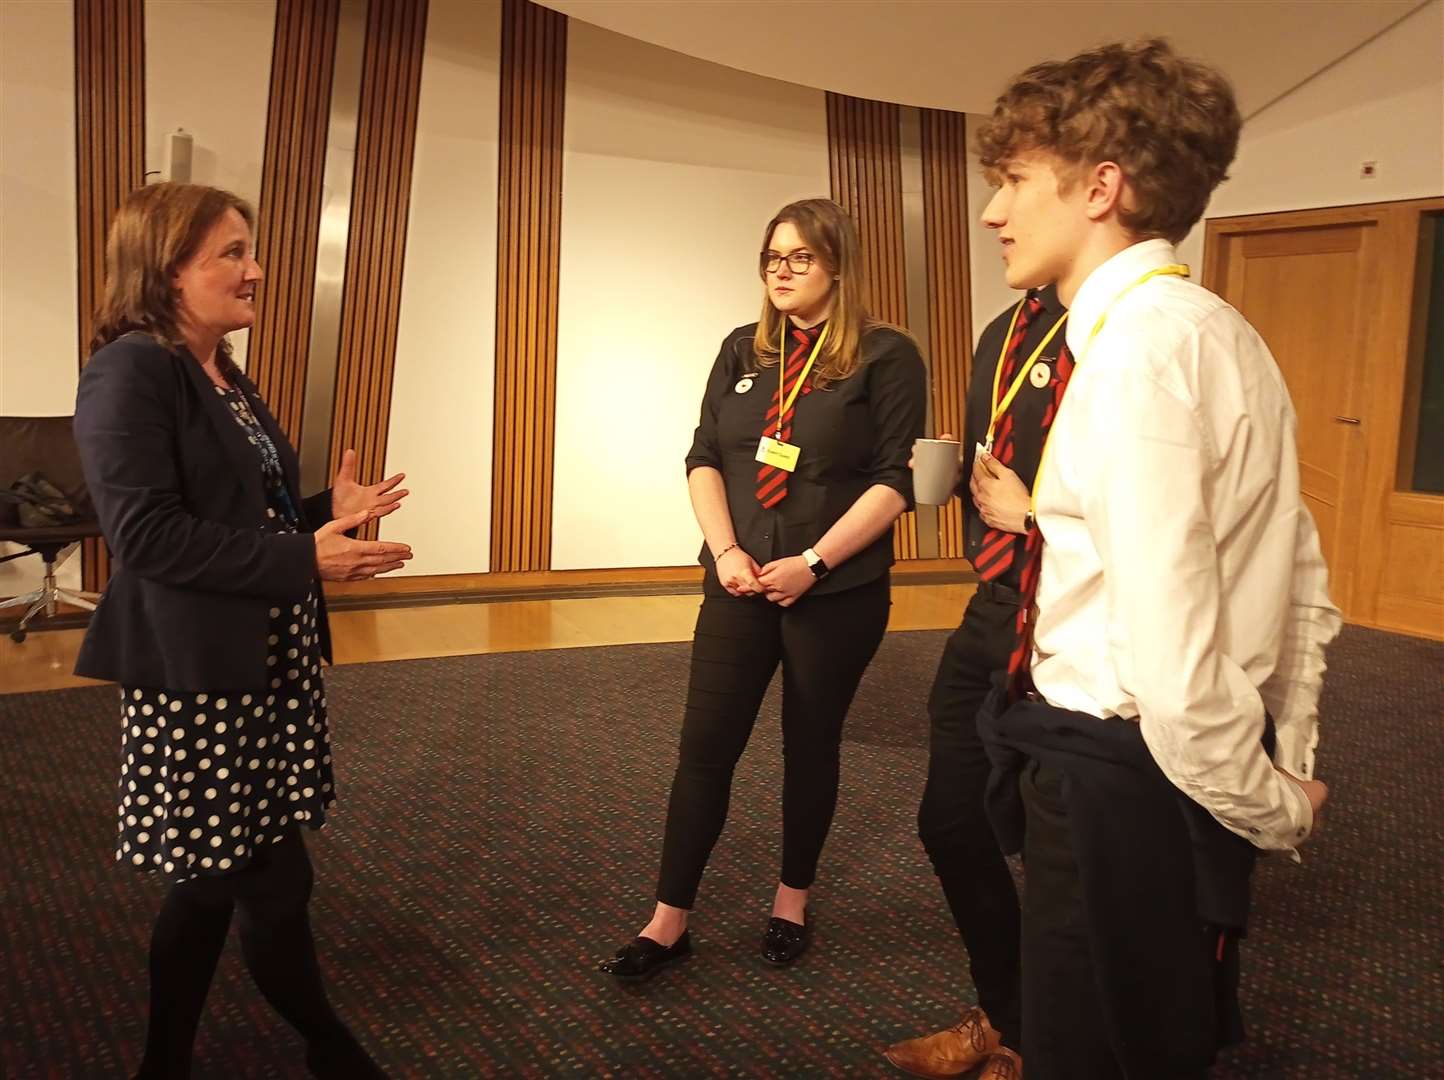 Ashleigh Coghill and Innes Morgan (with Kyle Leavesley partly hidden) meeting local MSP Maree Todd.